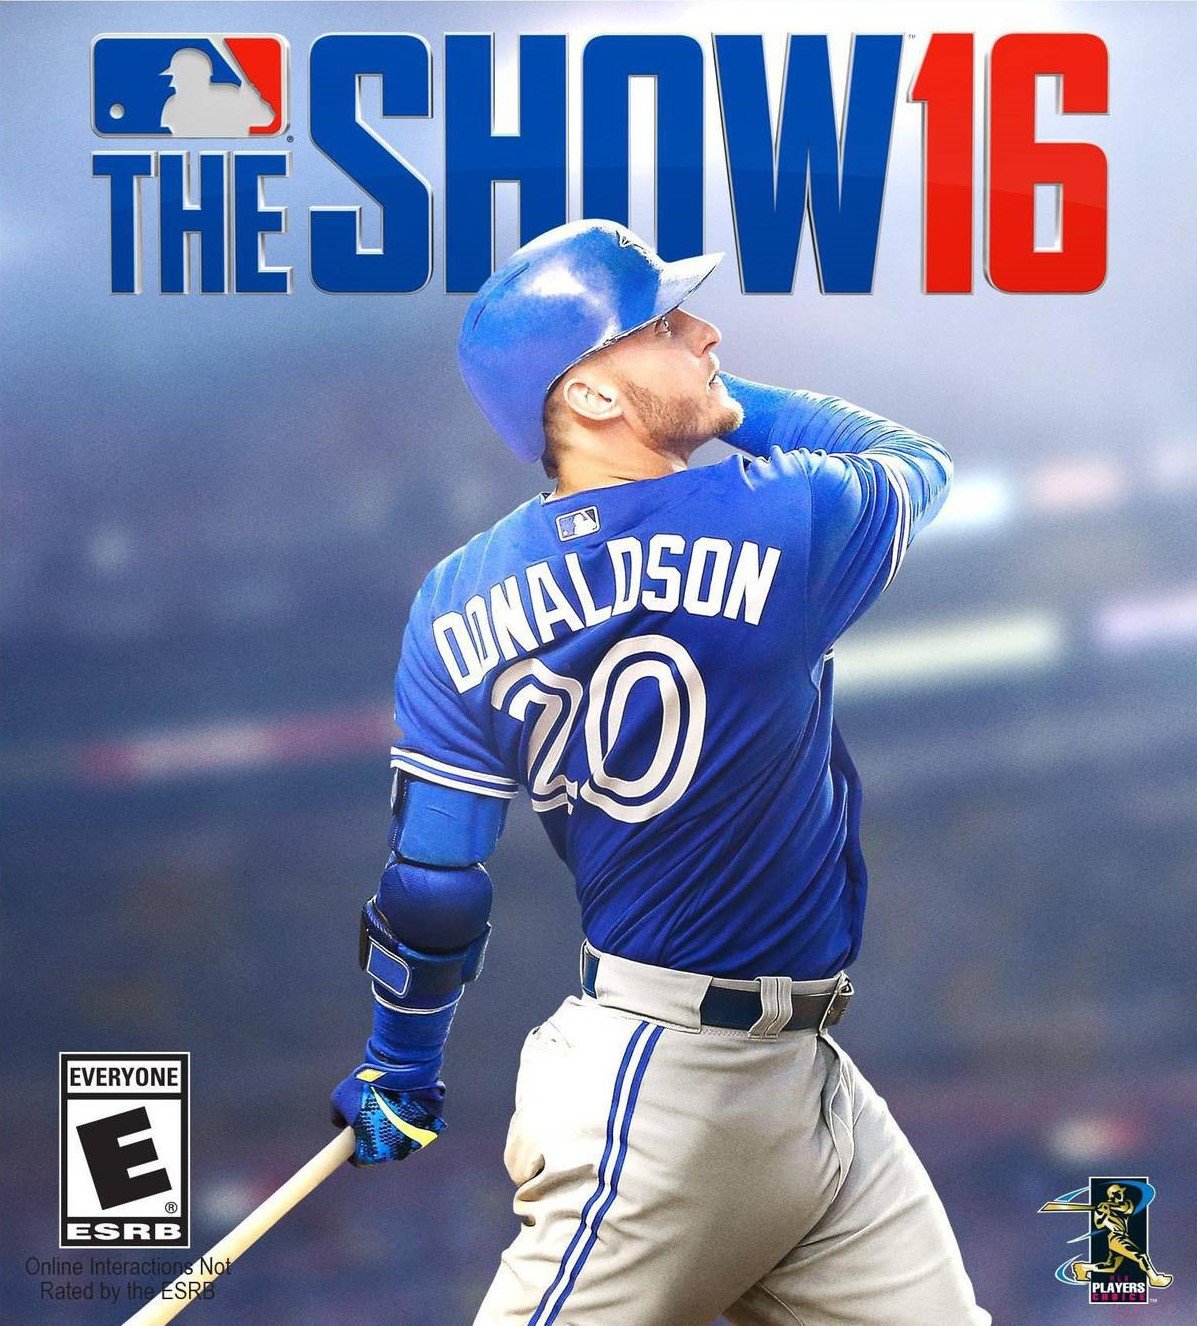 Image of MLB The Show 16